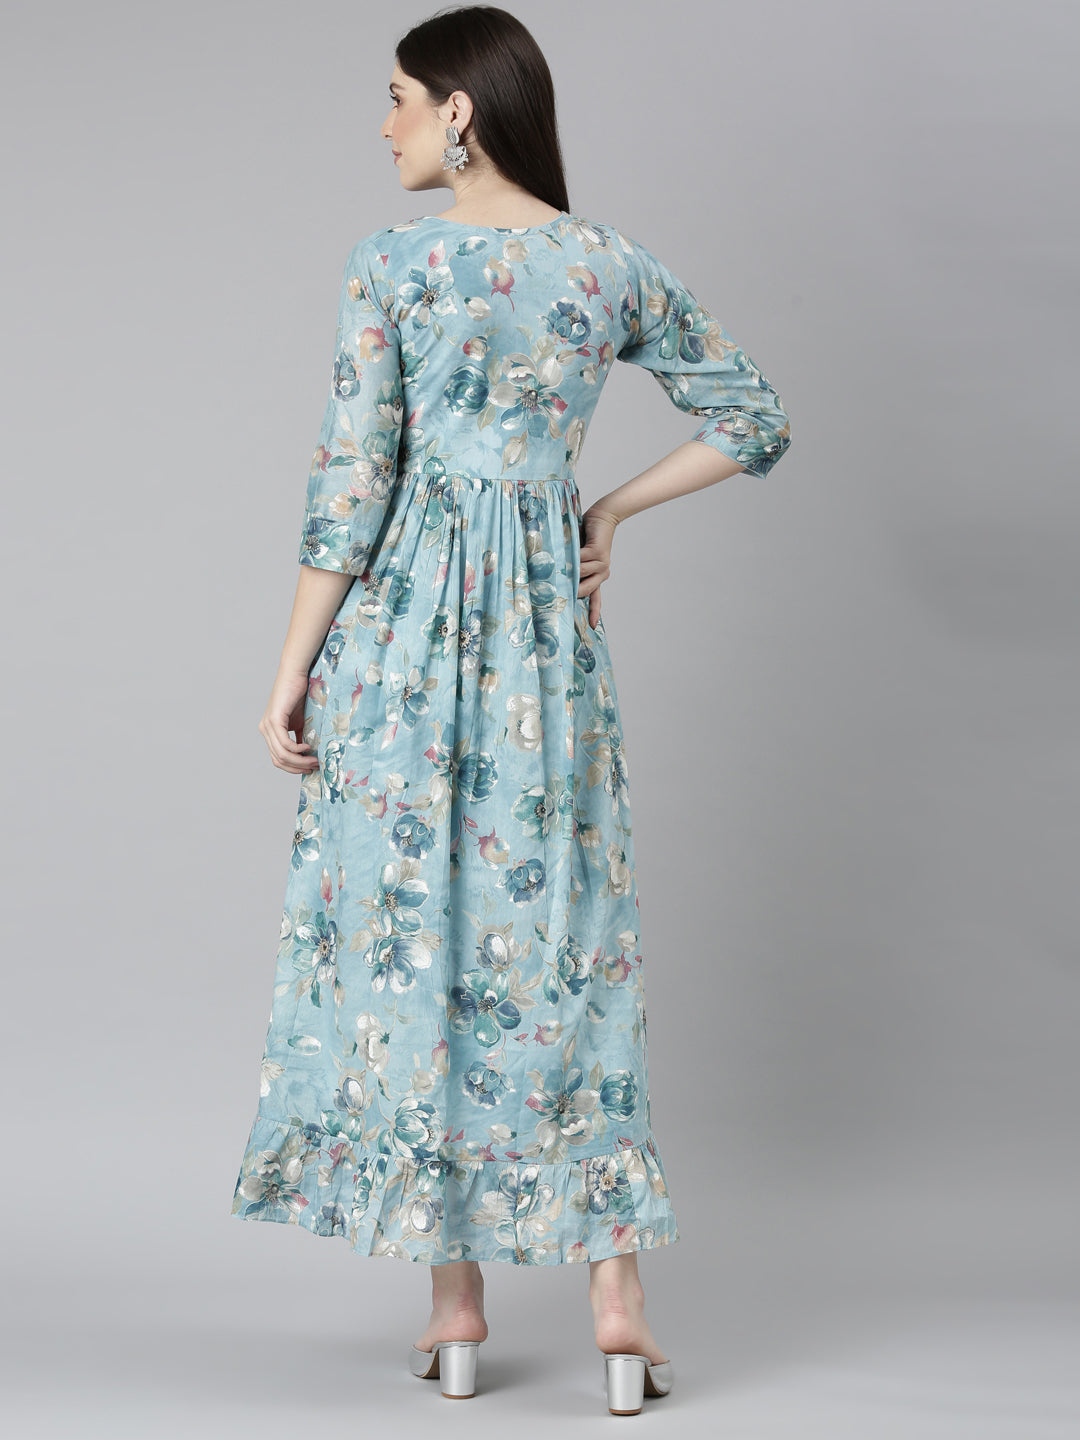 Neeru's Blue Straight Casual Floral Dresses